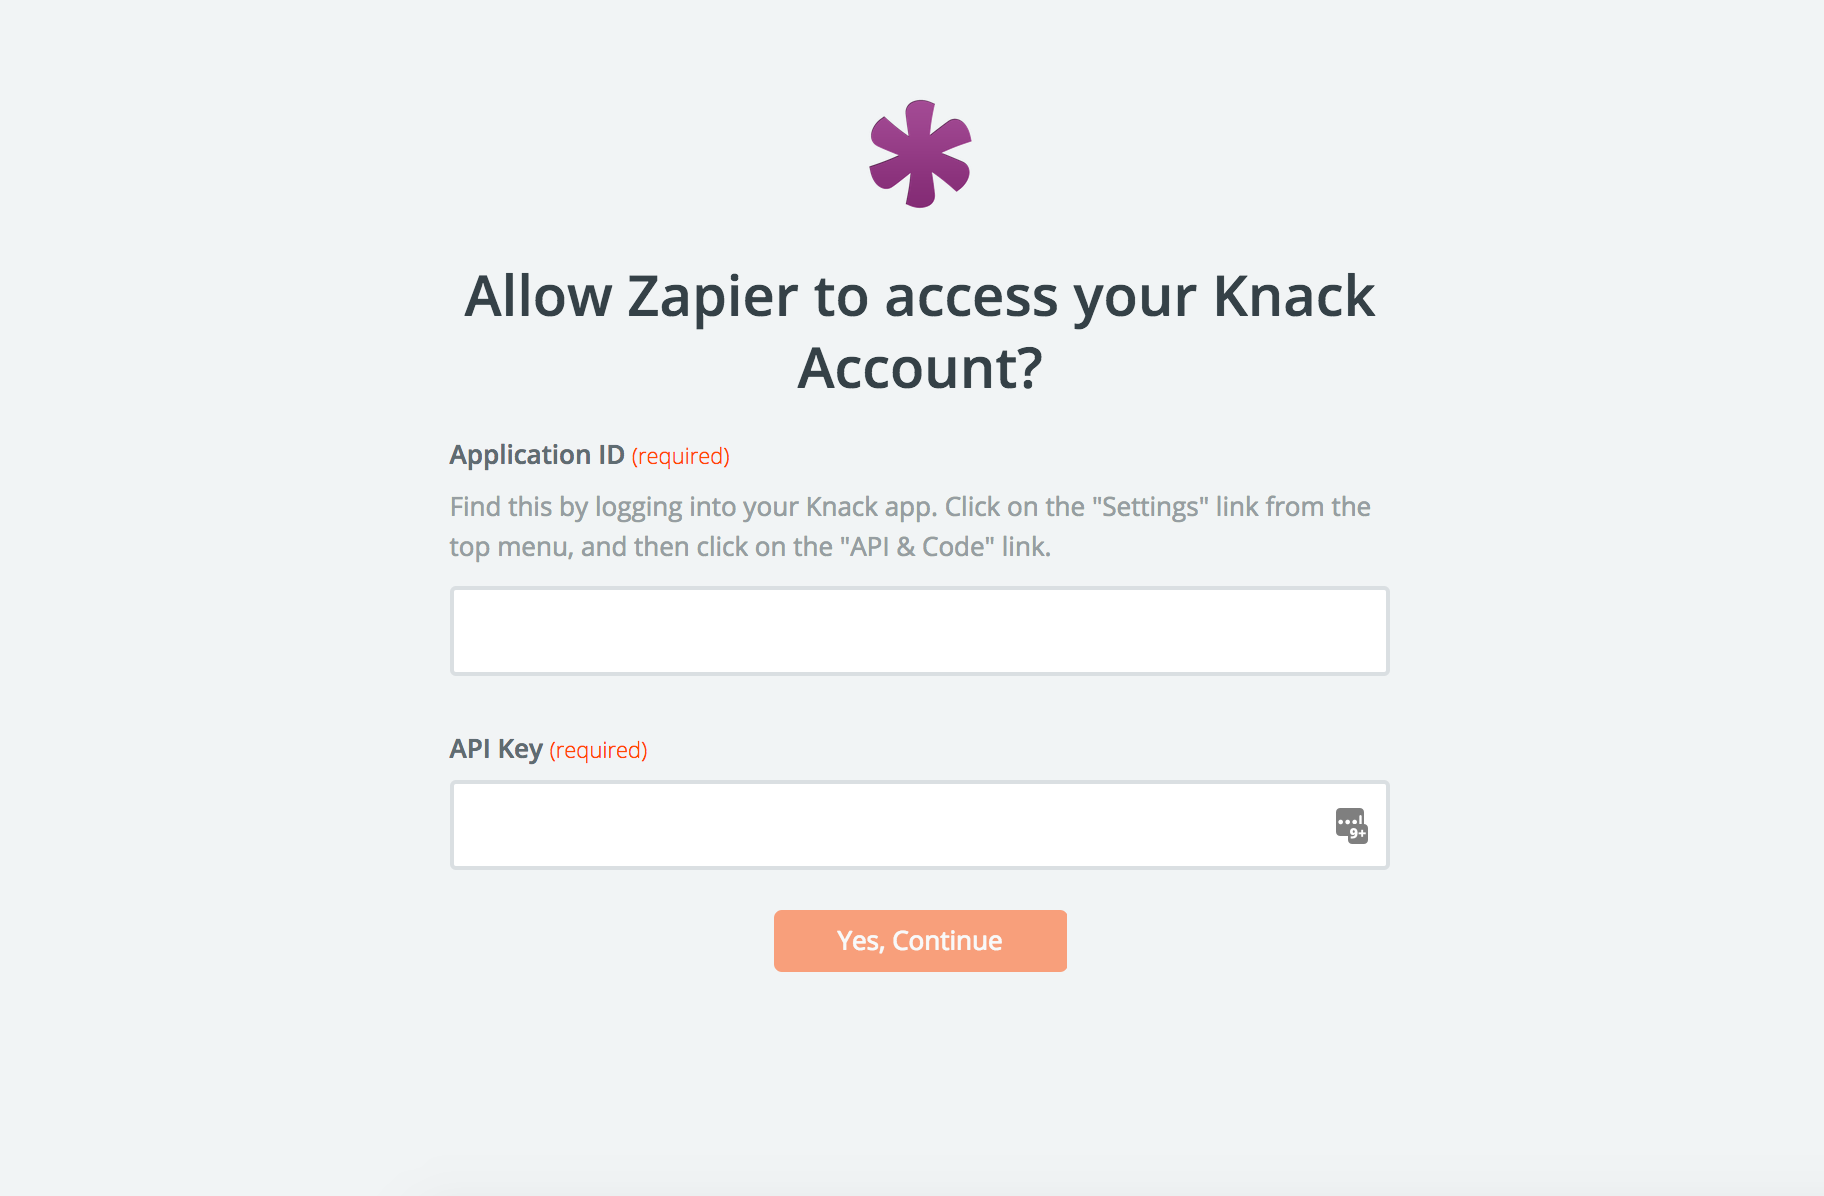 Now you'll see your Knack account connected to Zapier.